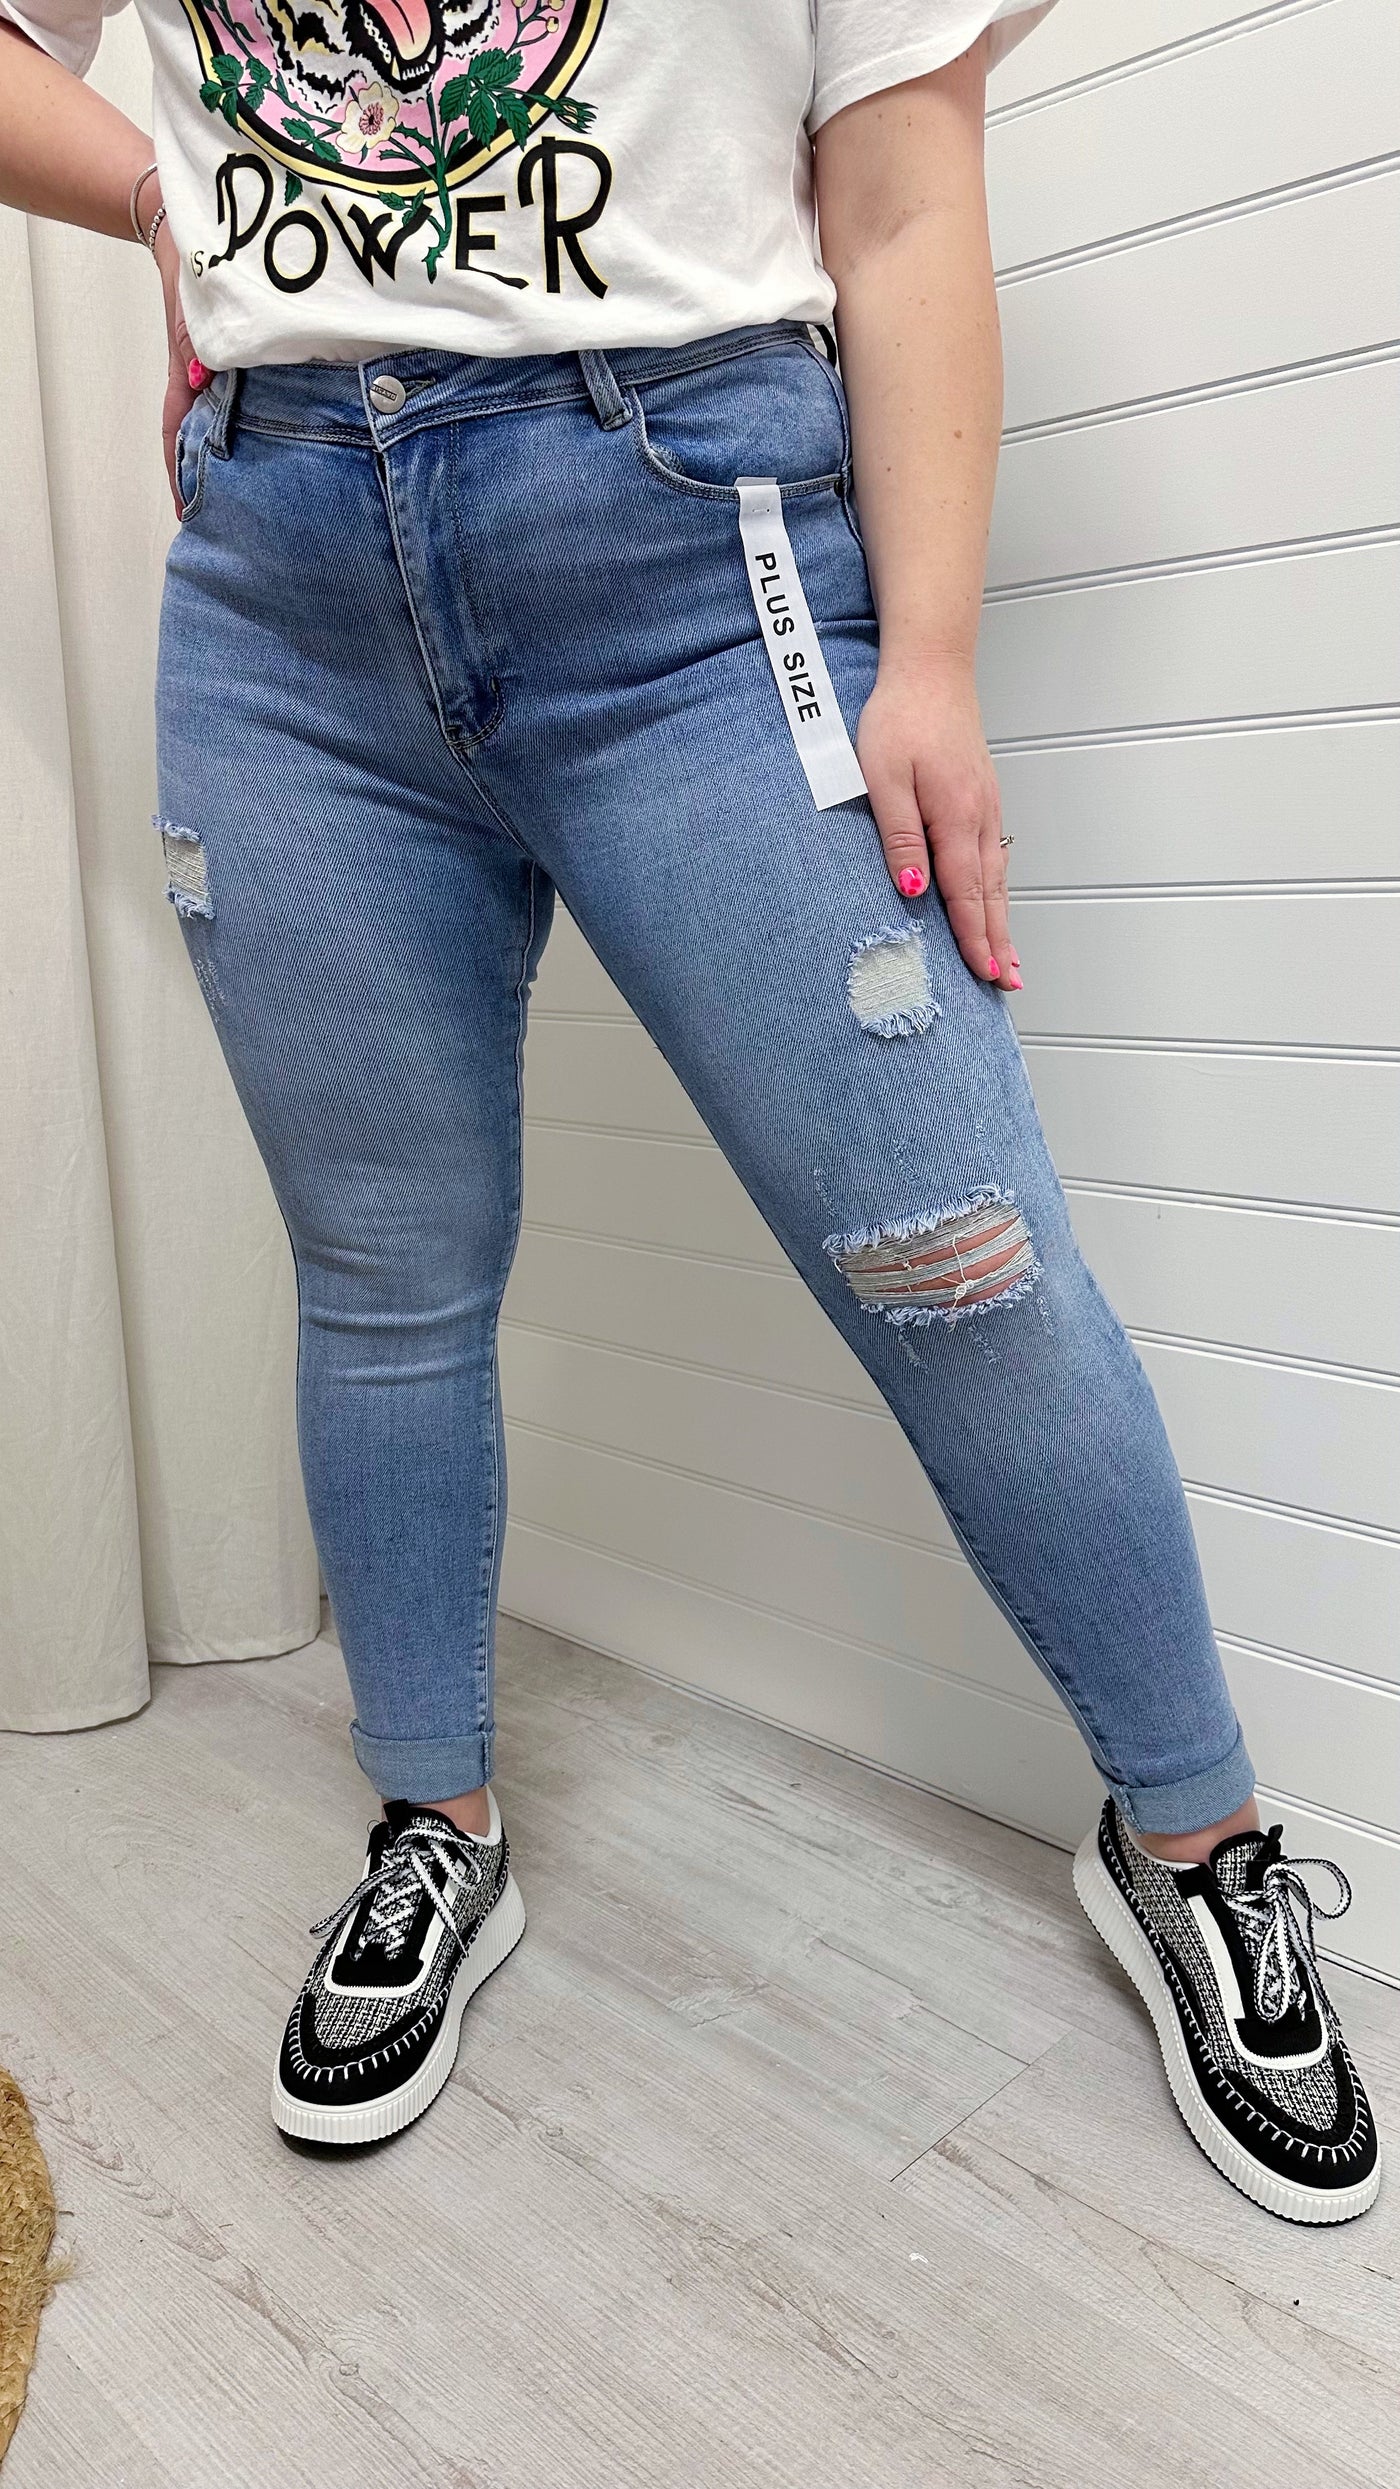 PLUS High Waisted Stretchy Ripped Skinny Jeans - DENIM BLUE